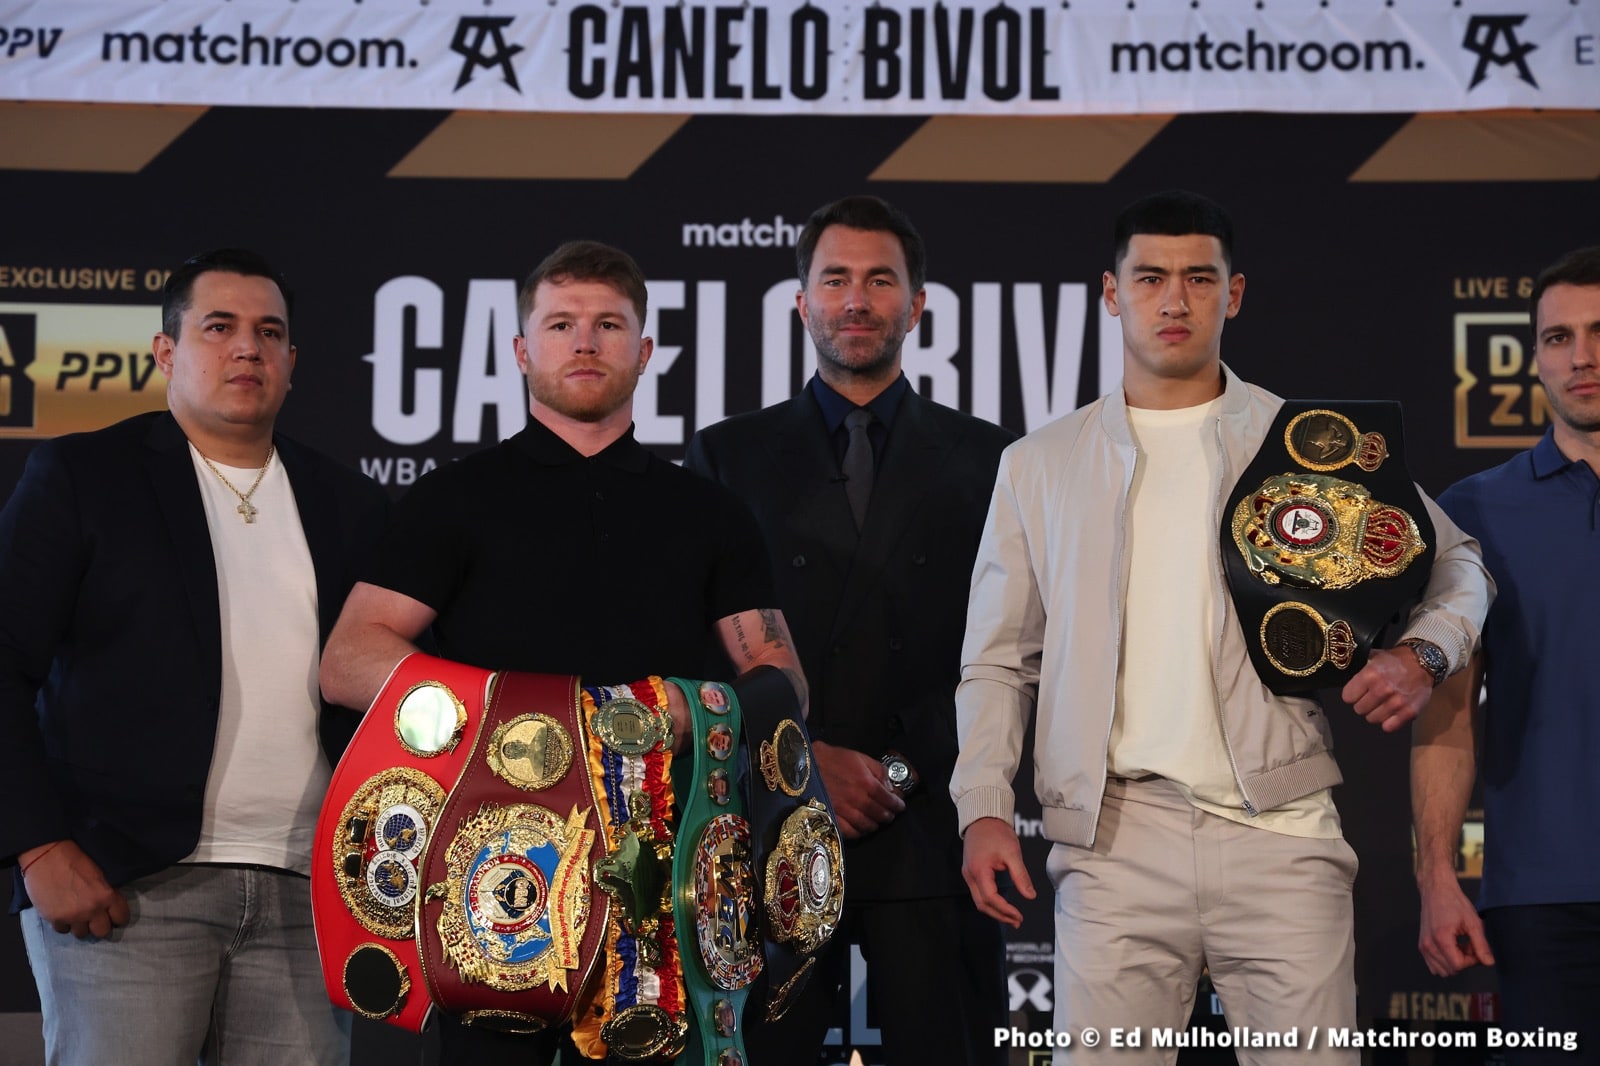 Eddie Hearn expects Canelo vs. Bivol to be a "thriller" on May 7th